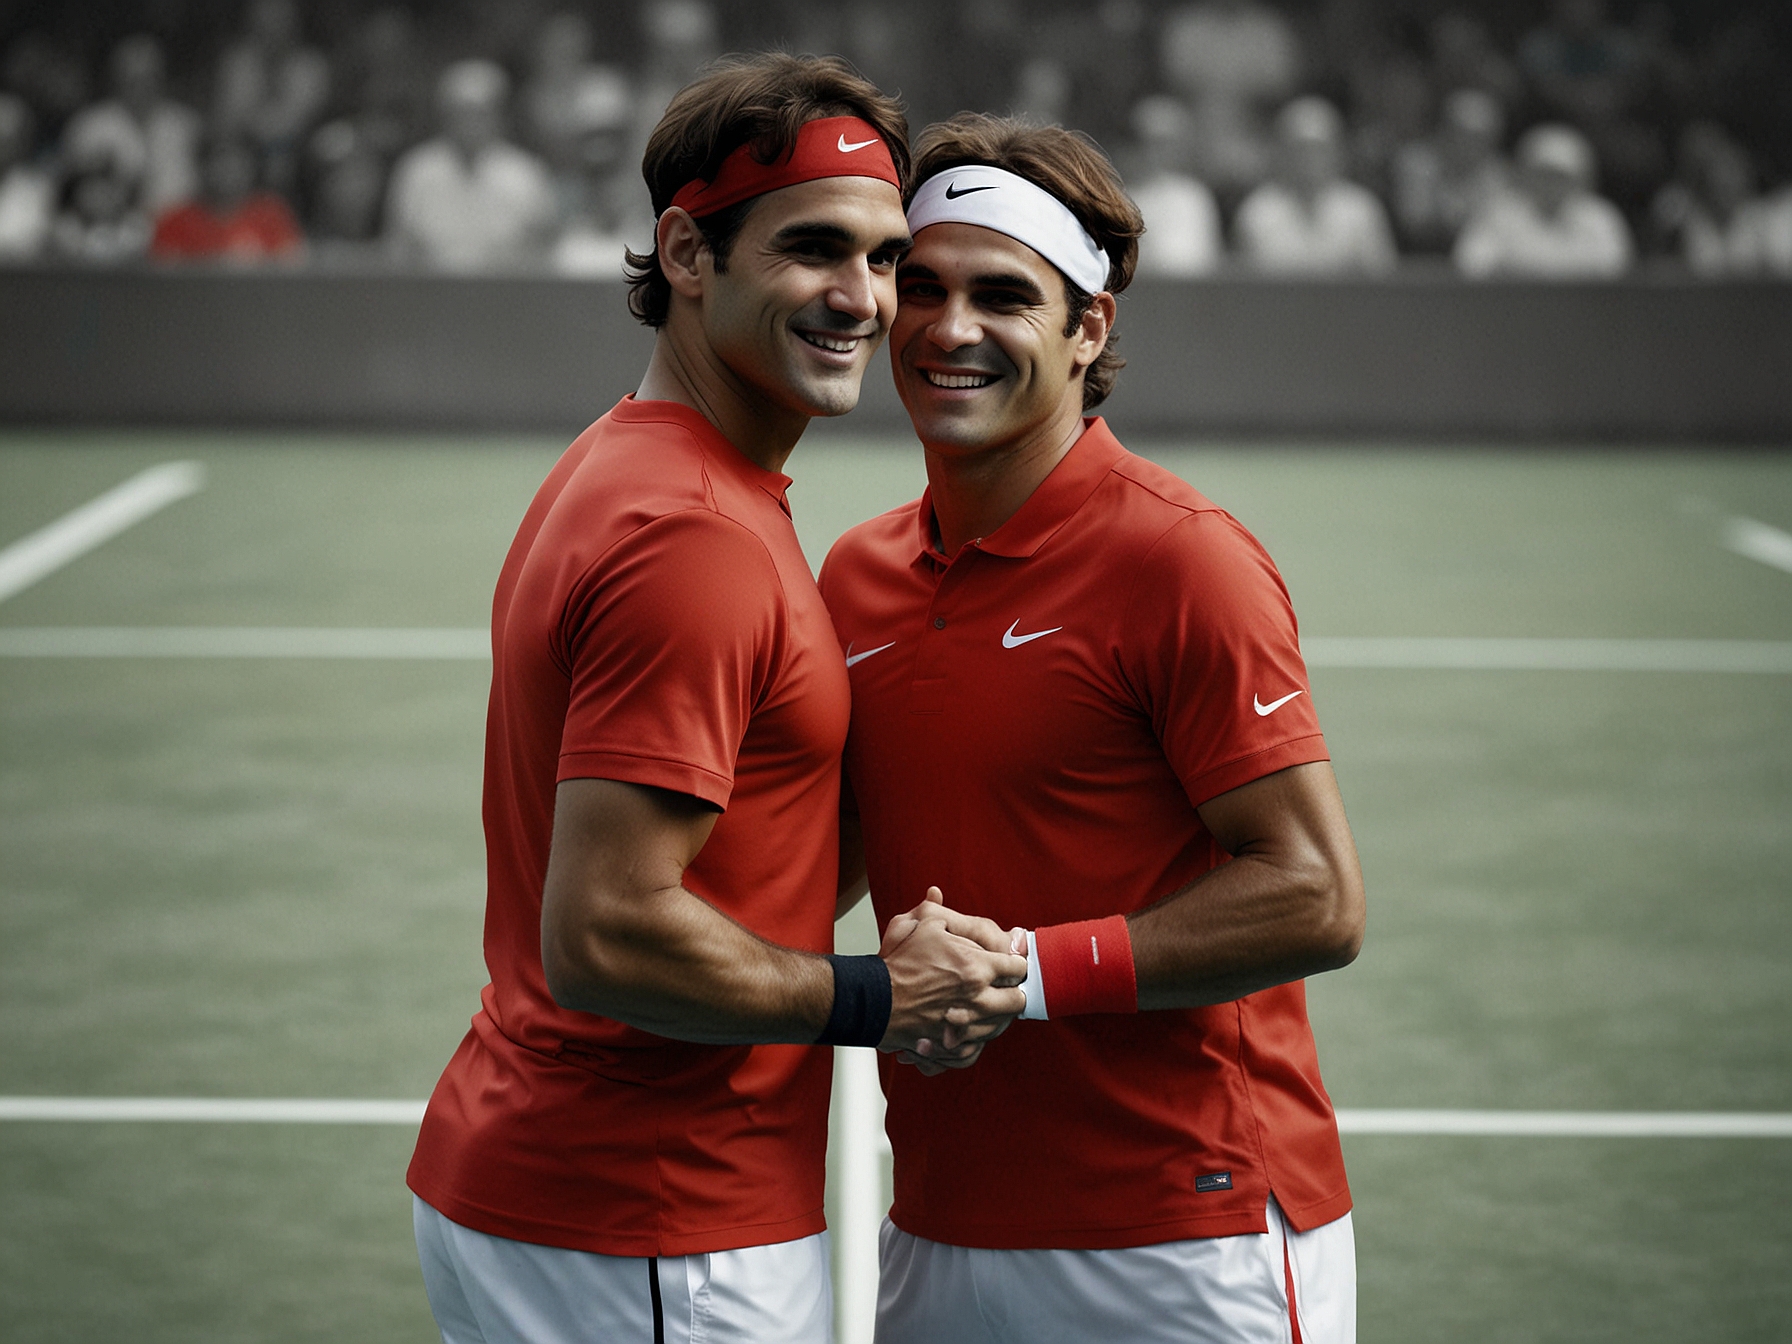 Roger Federer and Rafael Nadal sharing a moment during a tennis match, showcasing their famous rivalry.